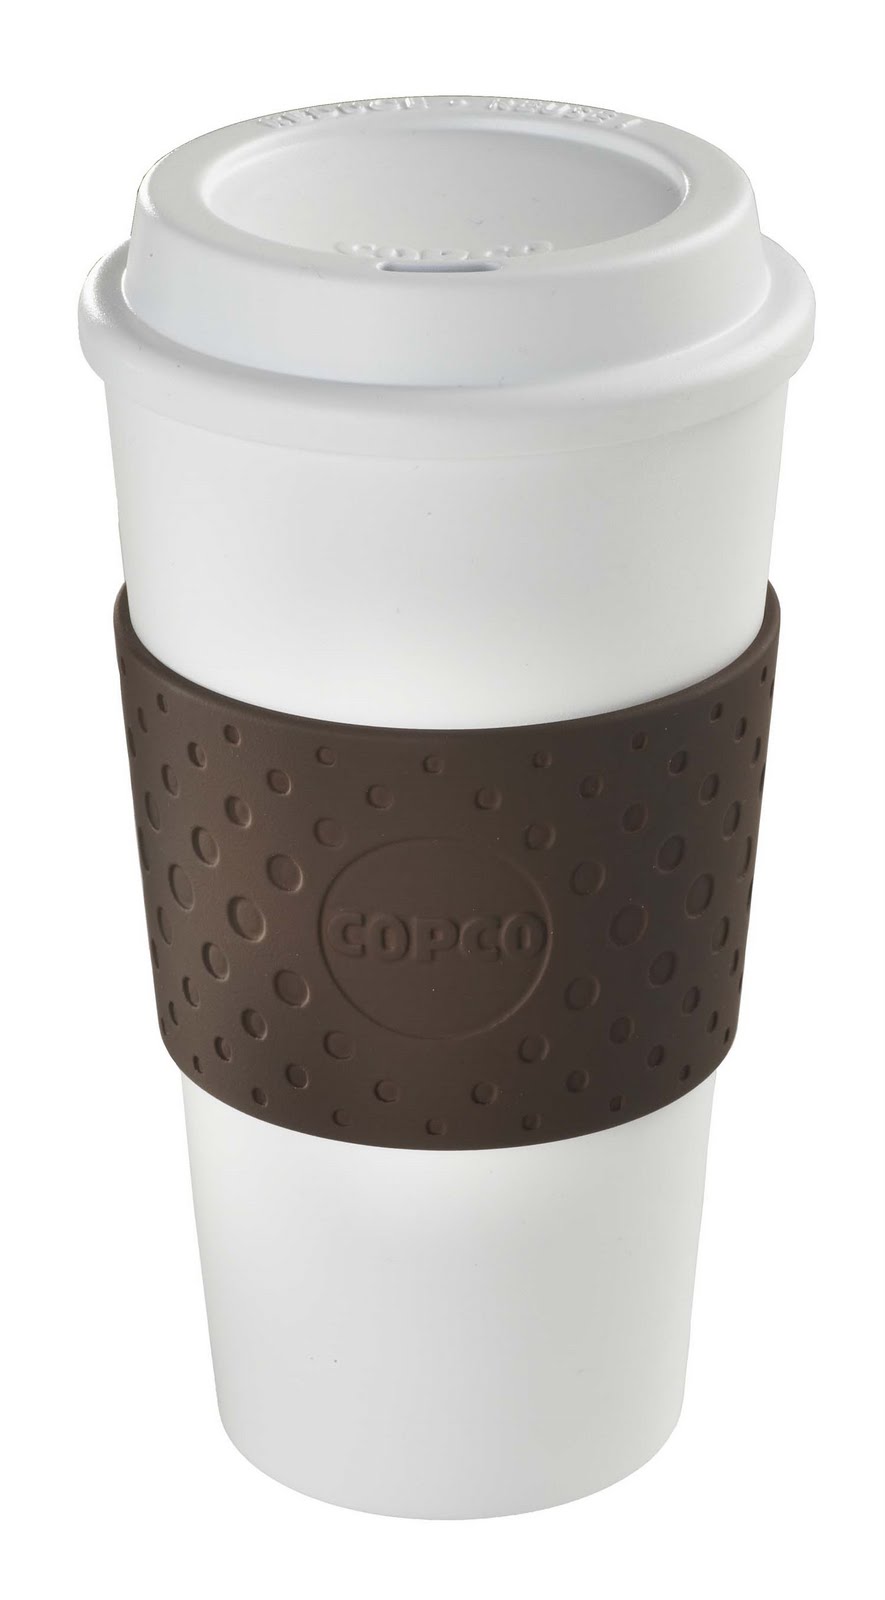 Free Coffee To Go Clipart Image.